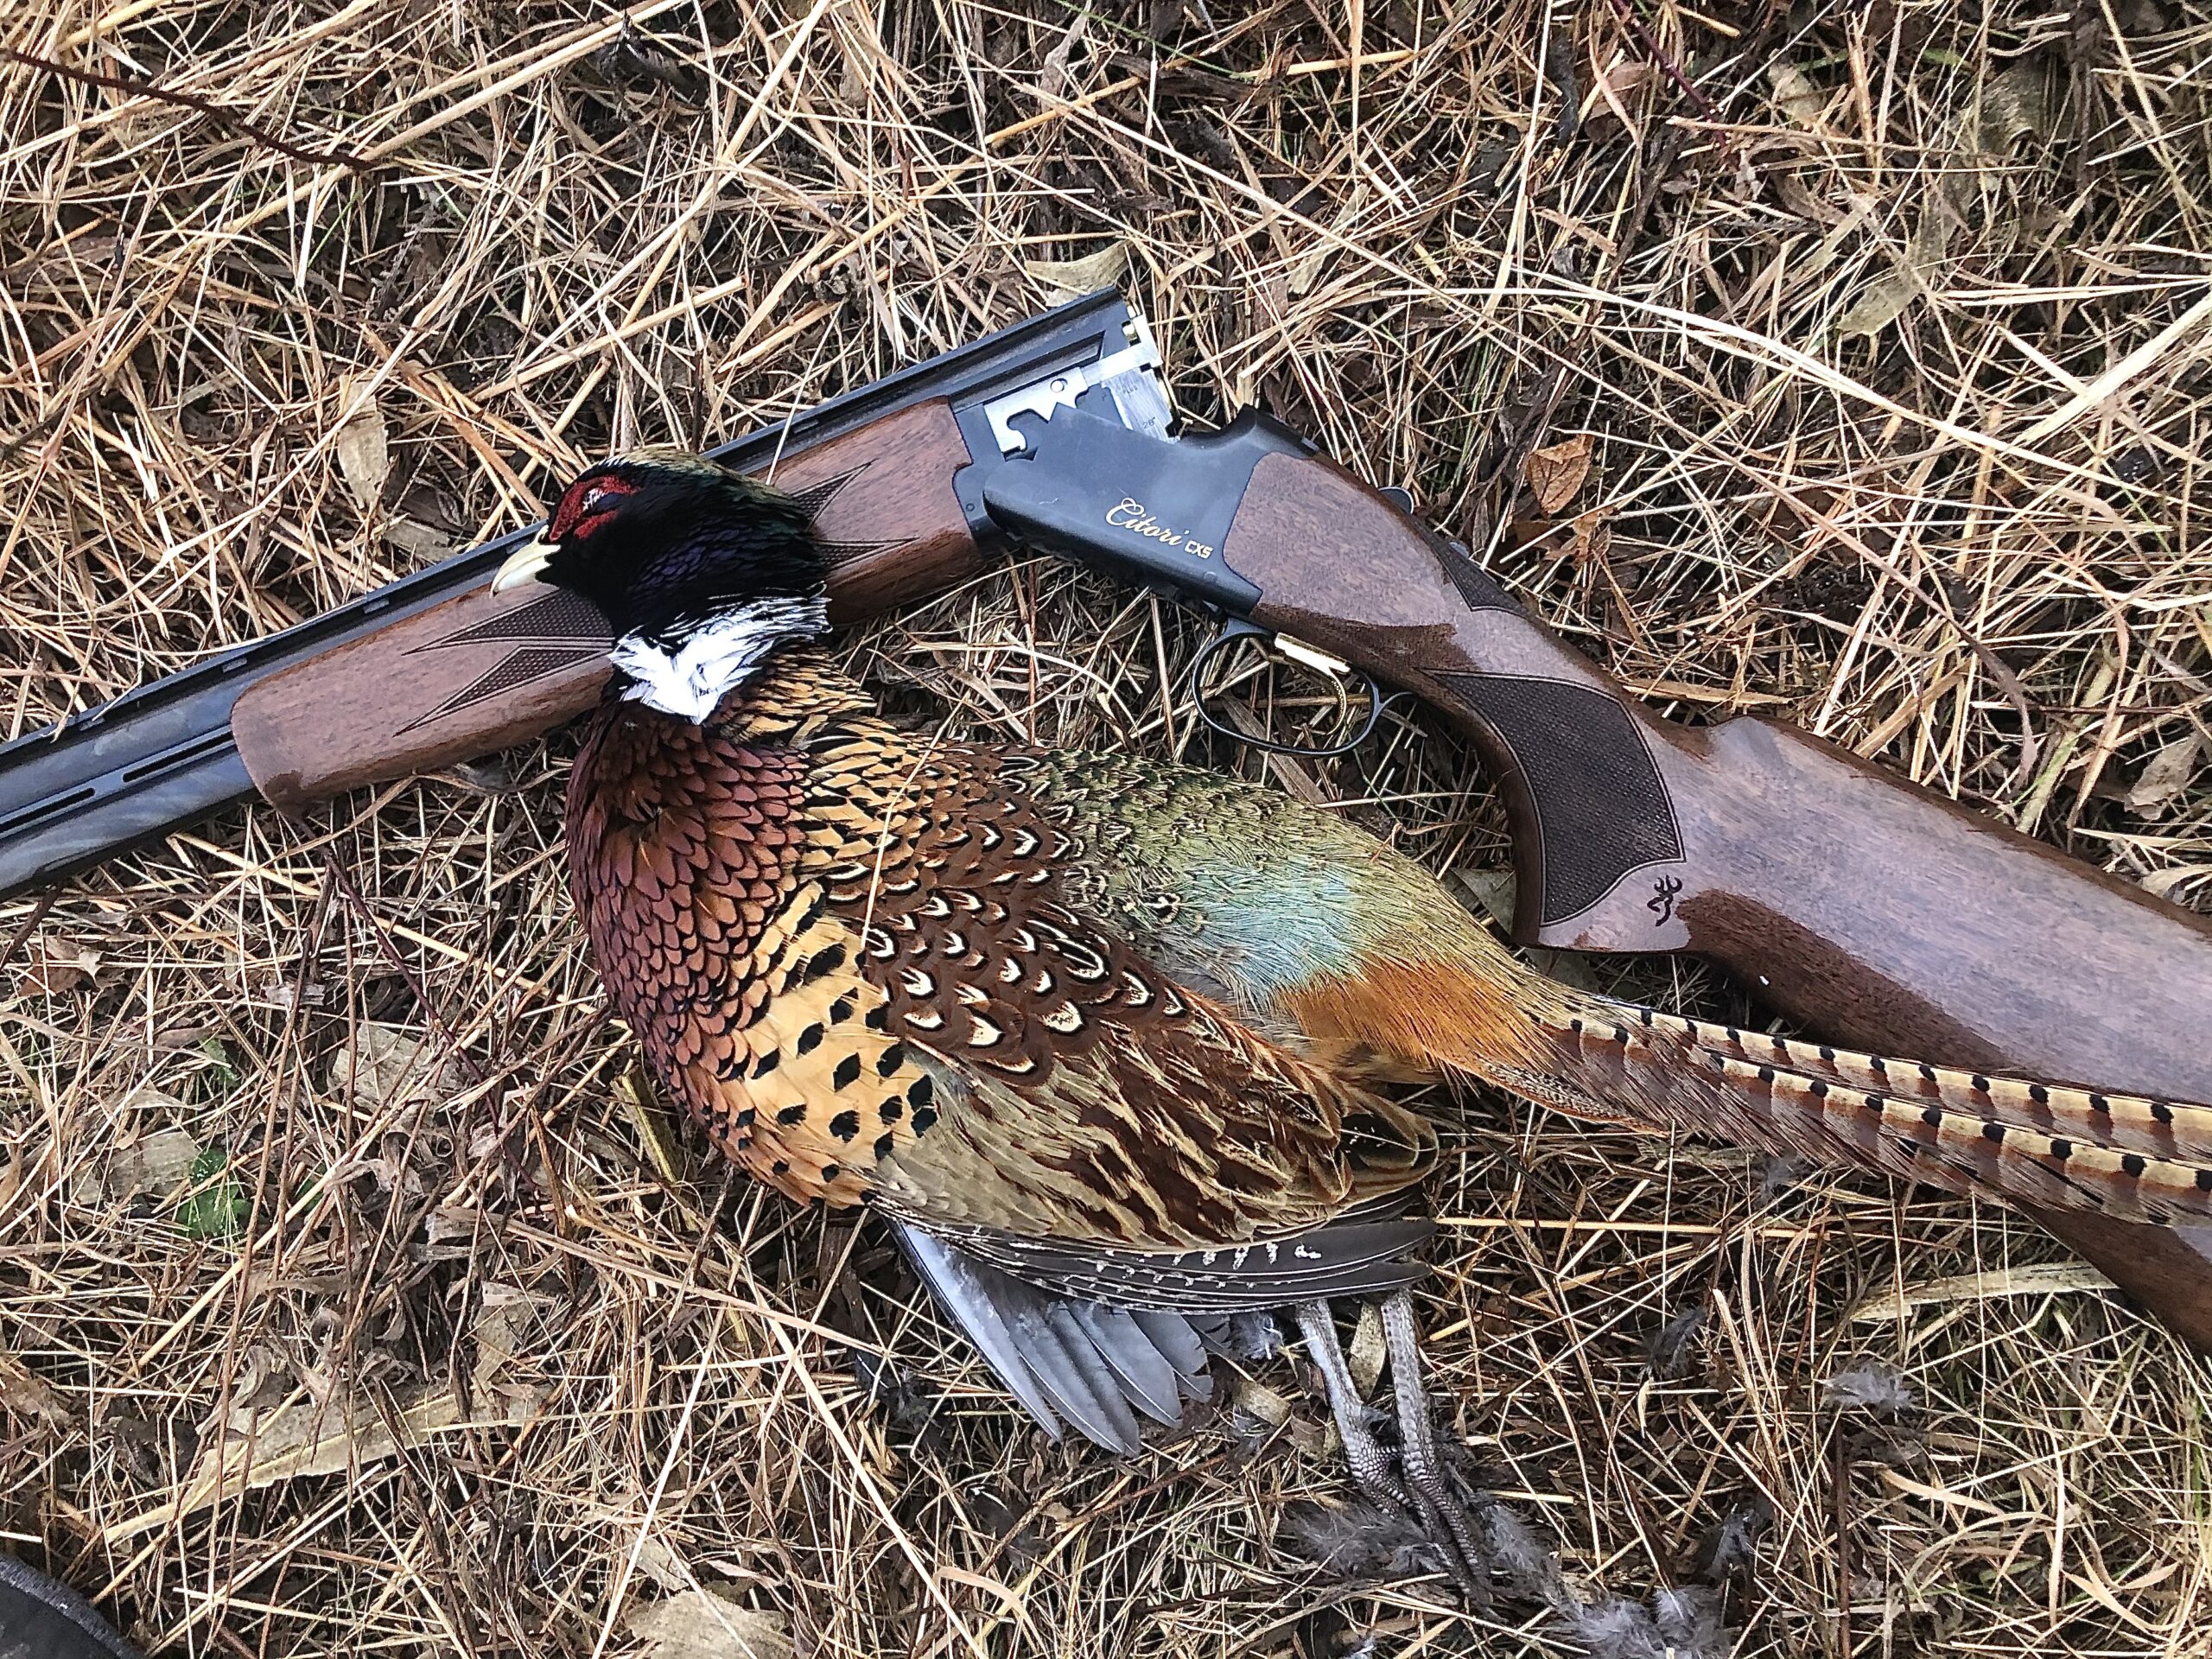 A Wisconsin rooster killed on a quick, public-land hunt.